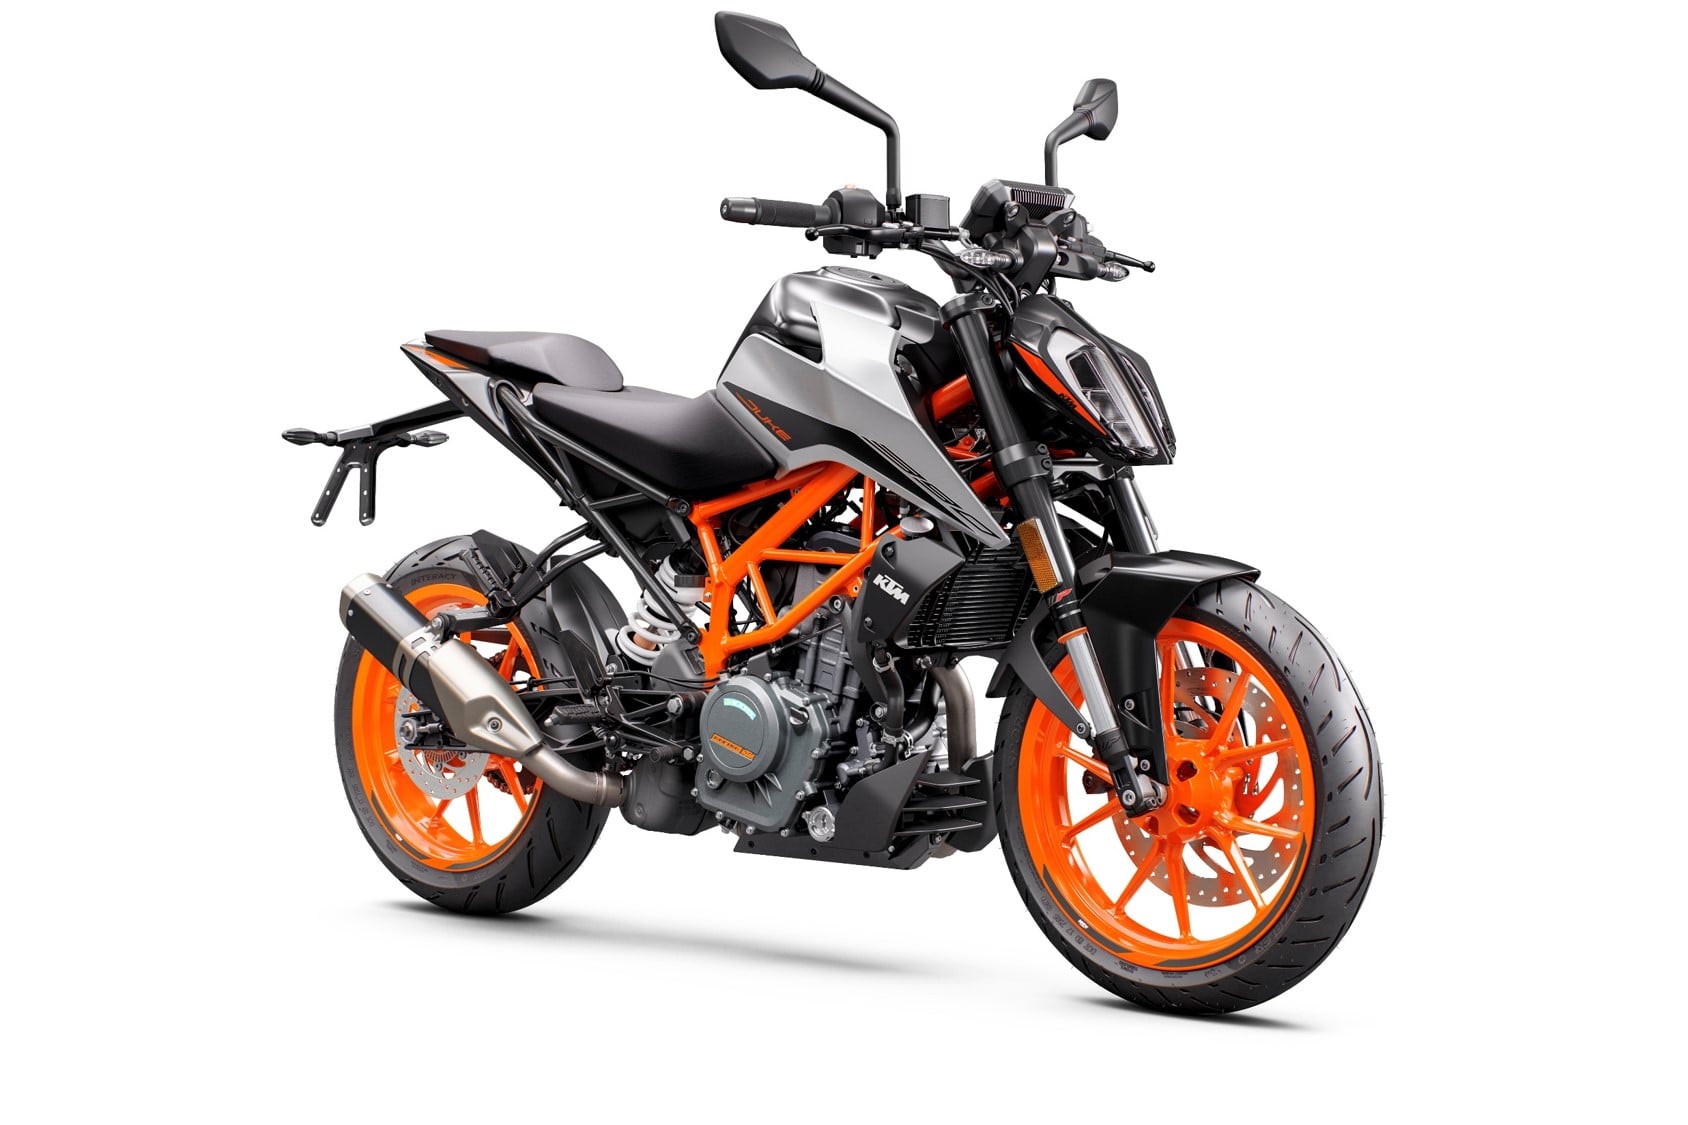 KTM is working on New 500cc Models and they could be Shockingly Priced